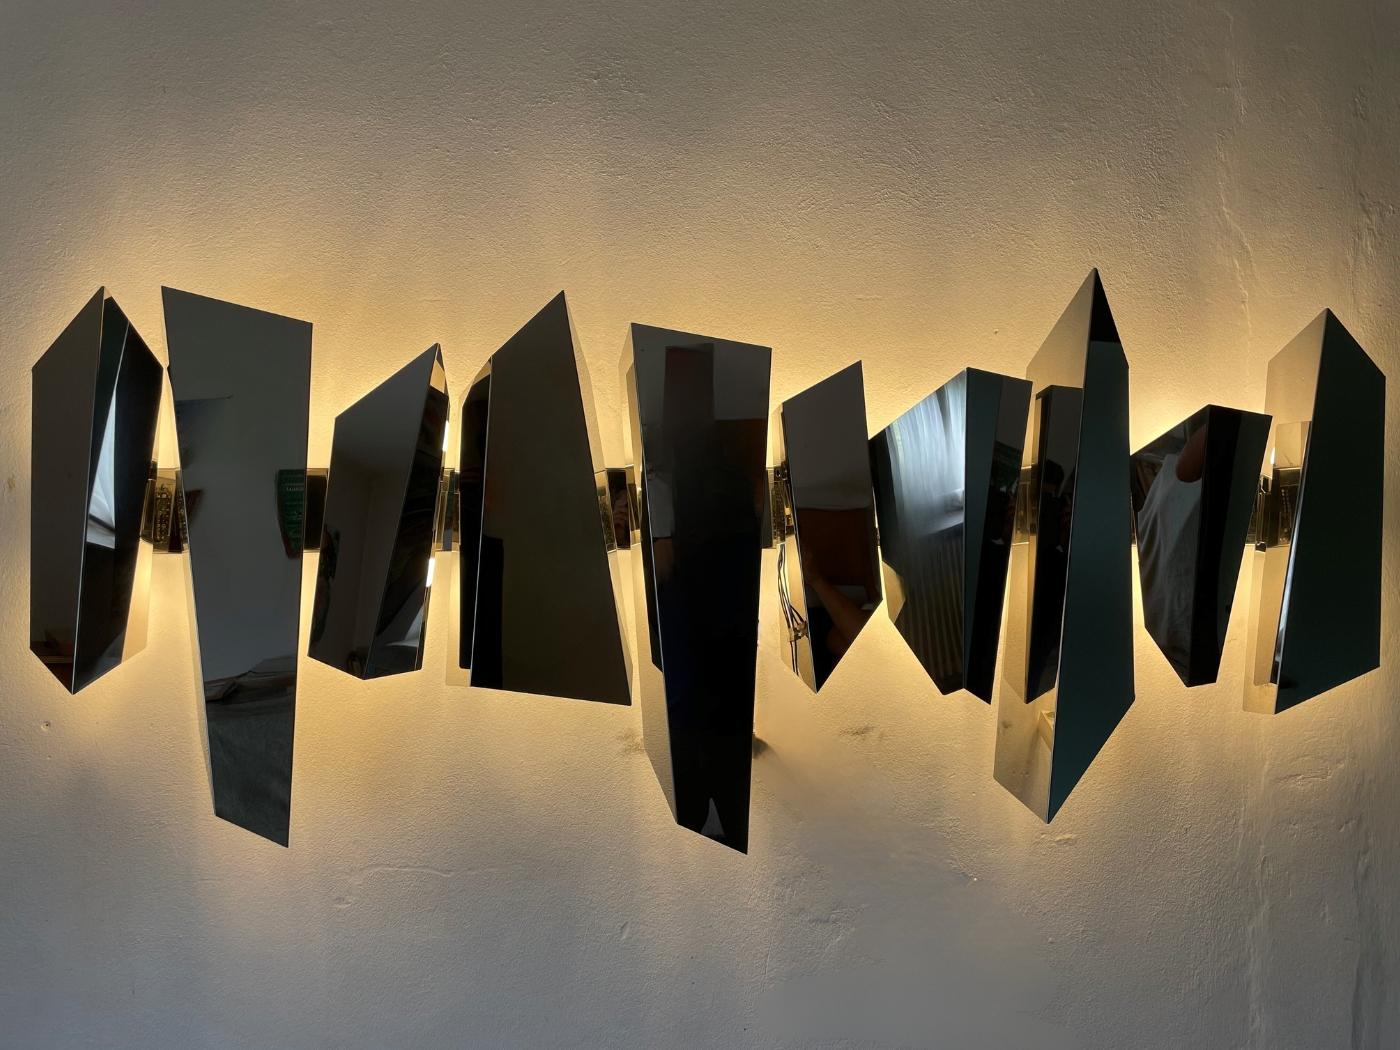 Large wall-mounted chromed steel lighted sculpture by Mario Torregiani, circa 1990
Made in Italy, it's in perfect condition and very difficult to find.
Italian plug.

